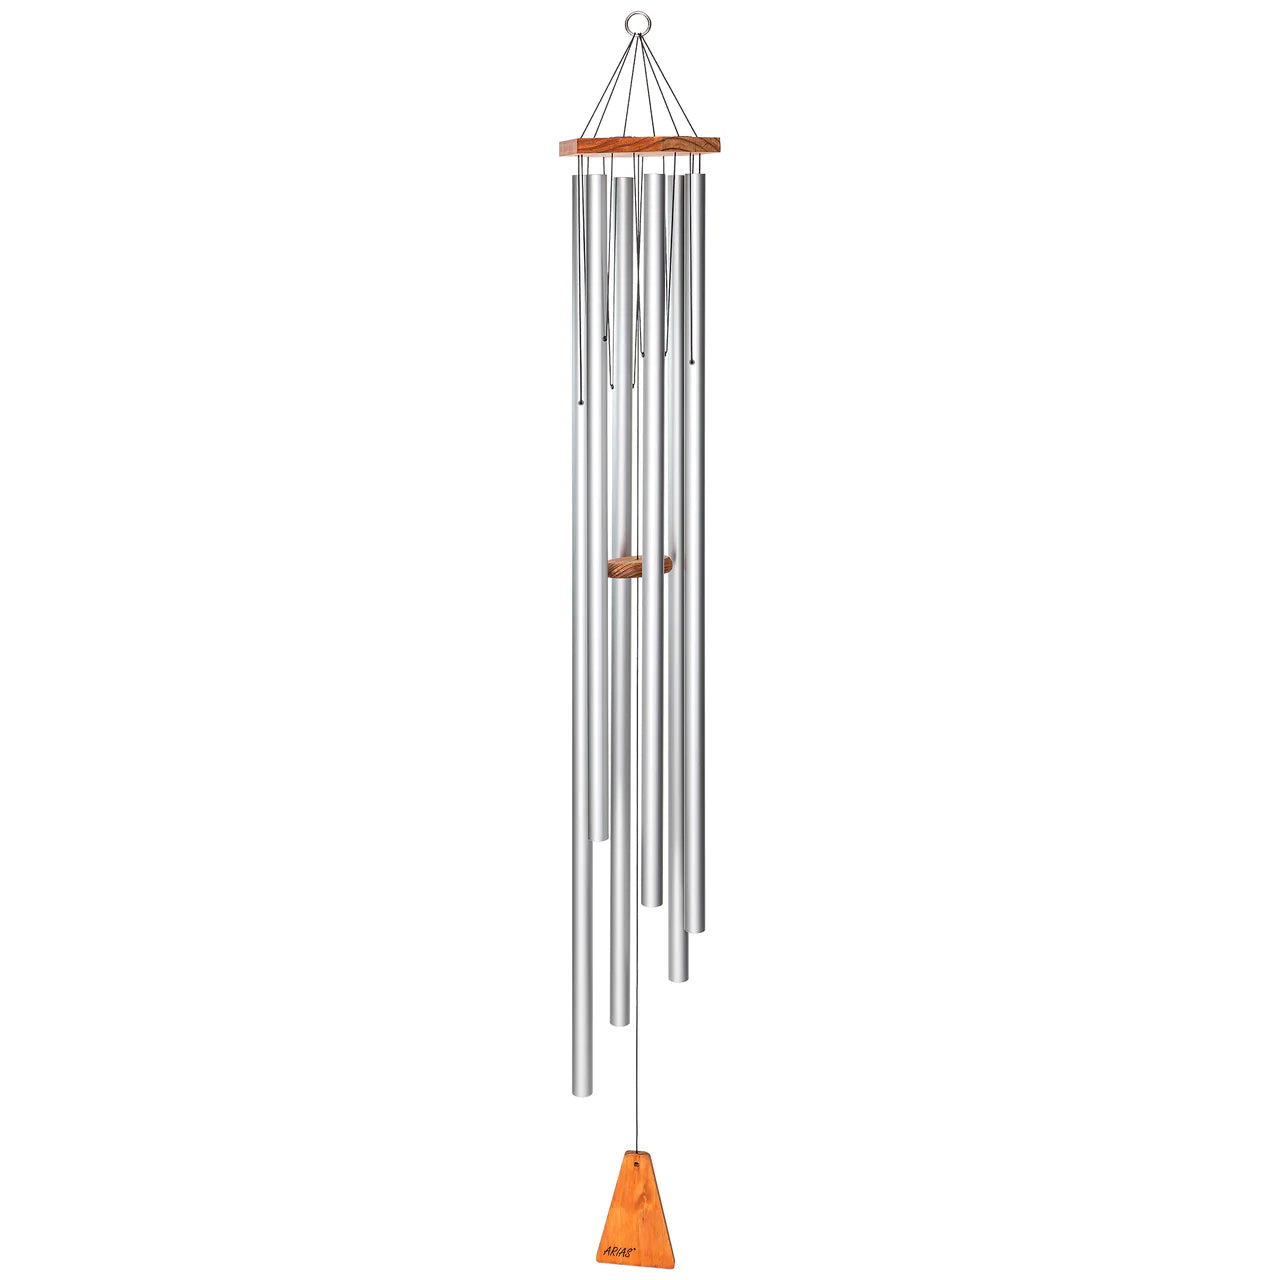 Arias® by Wind River Windchime